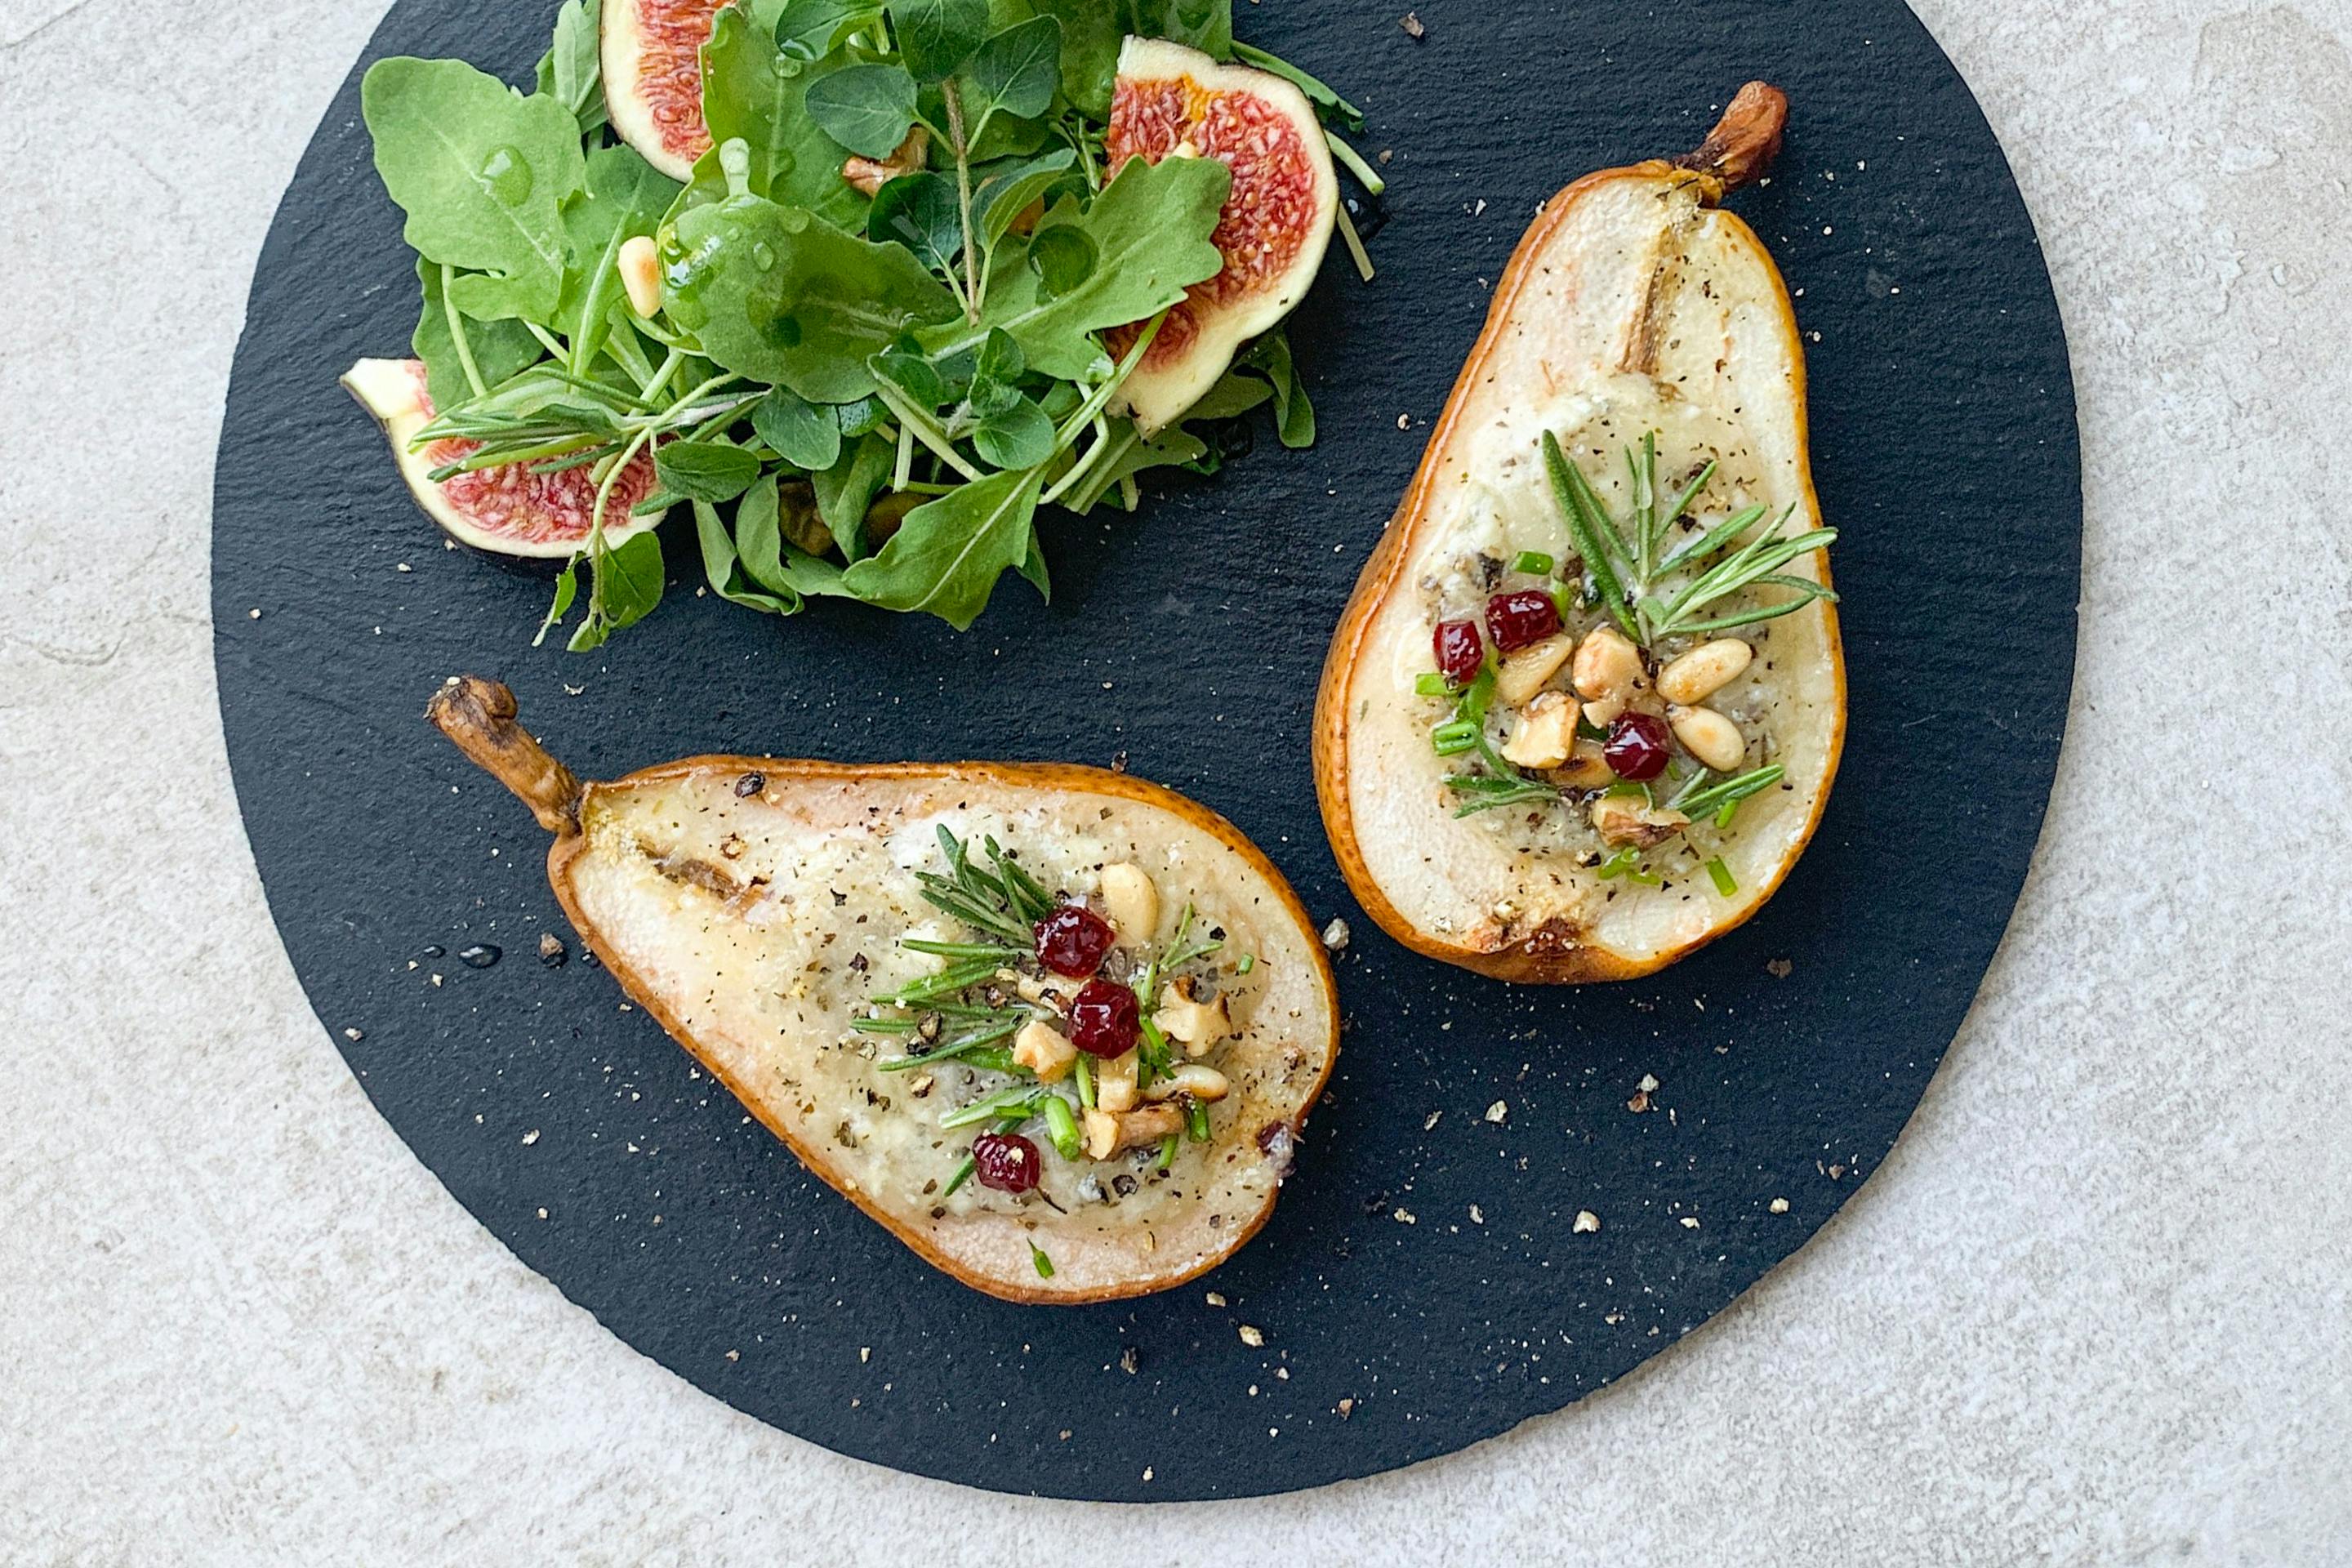 filled half pears along with salad and figs on a black plate